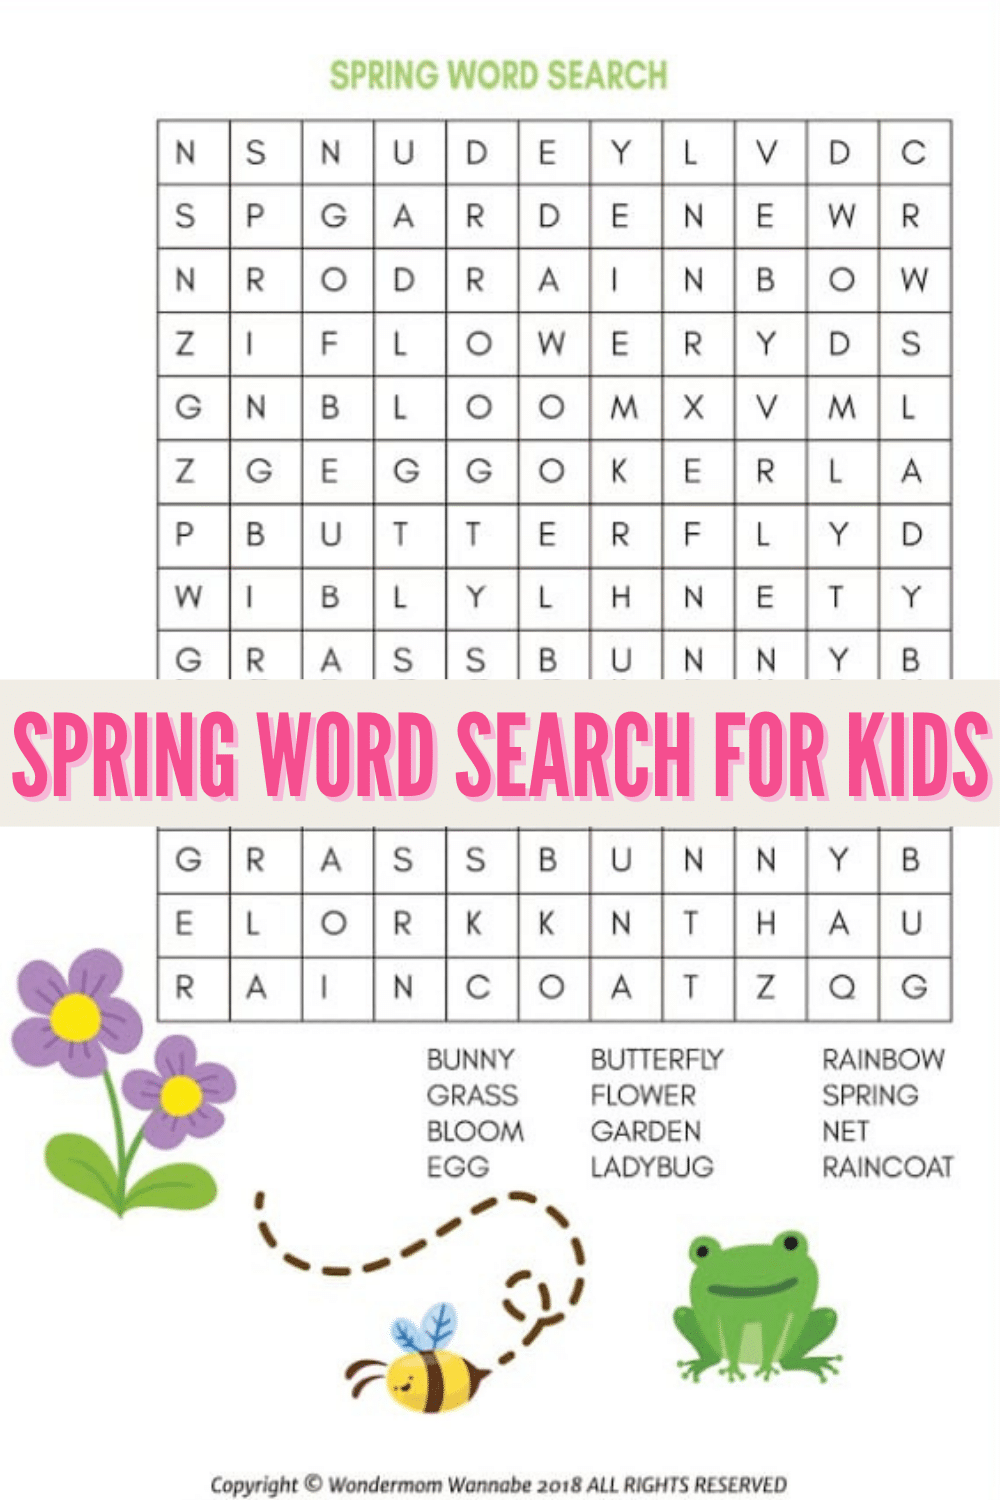 Children will have fun completing this printable Spring Word Search for kids. Full of spring-themed words this is great for home or school. #spring #wordsearch #printables via @wondermomwannab